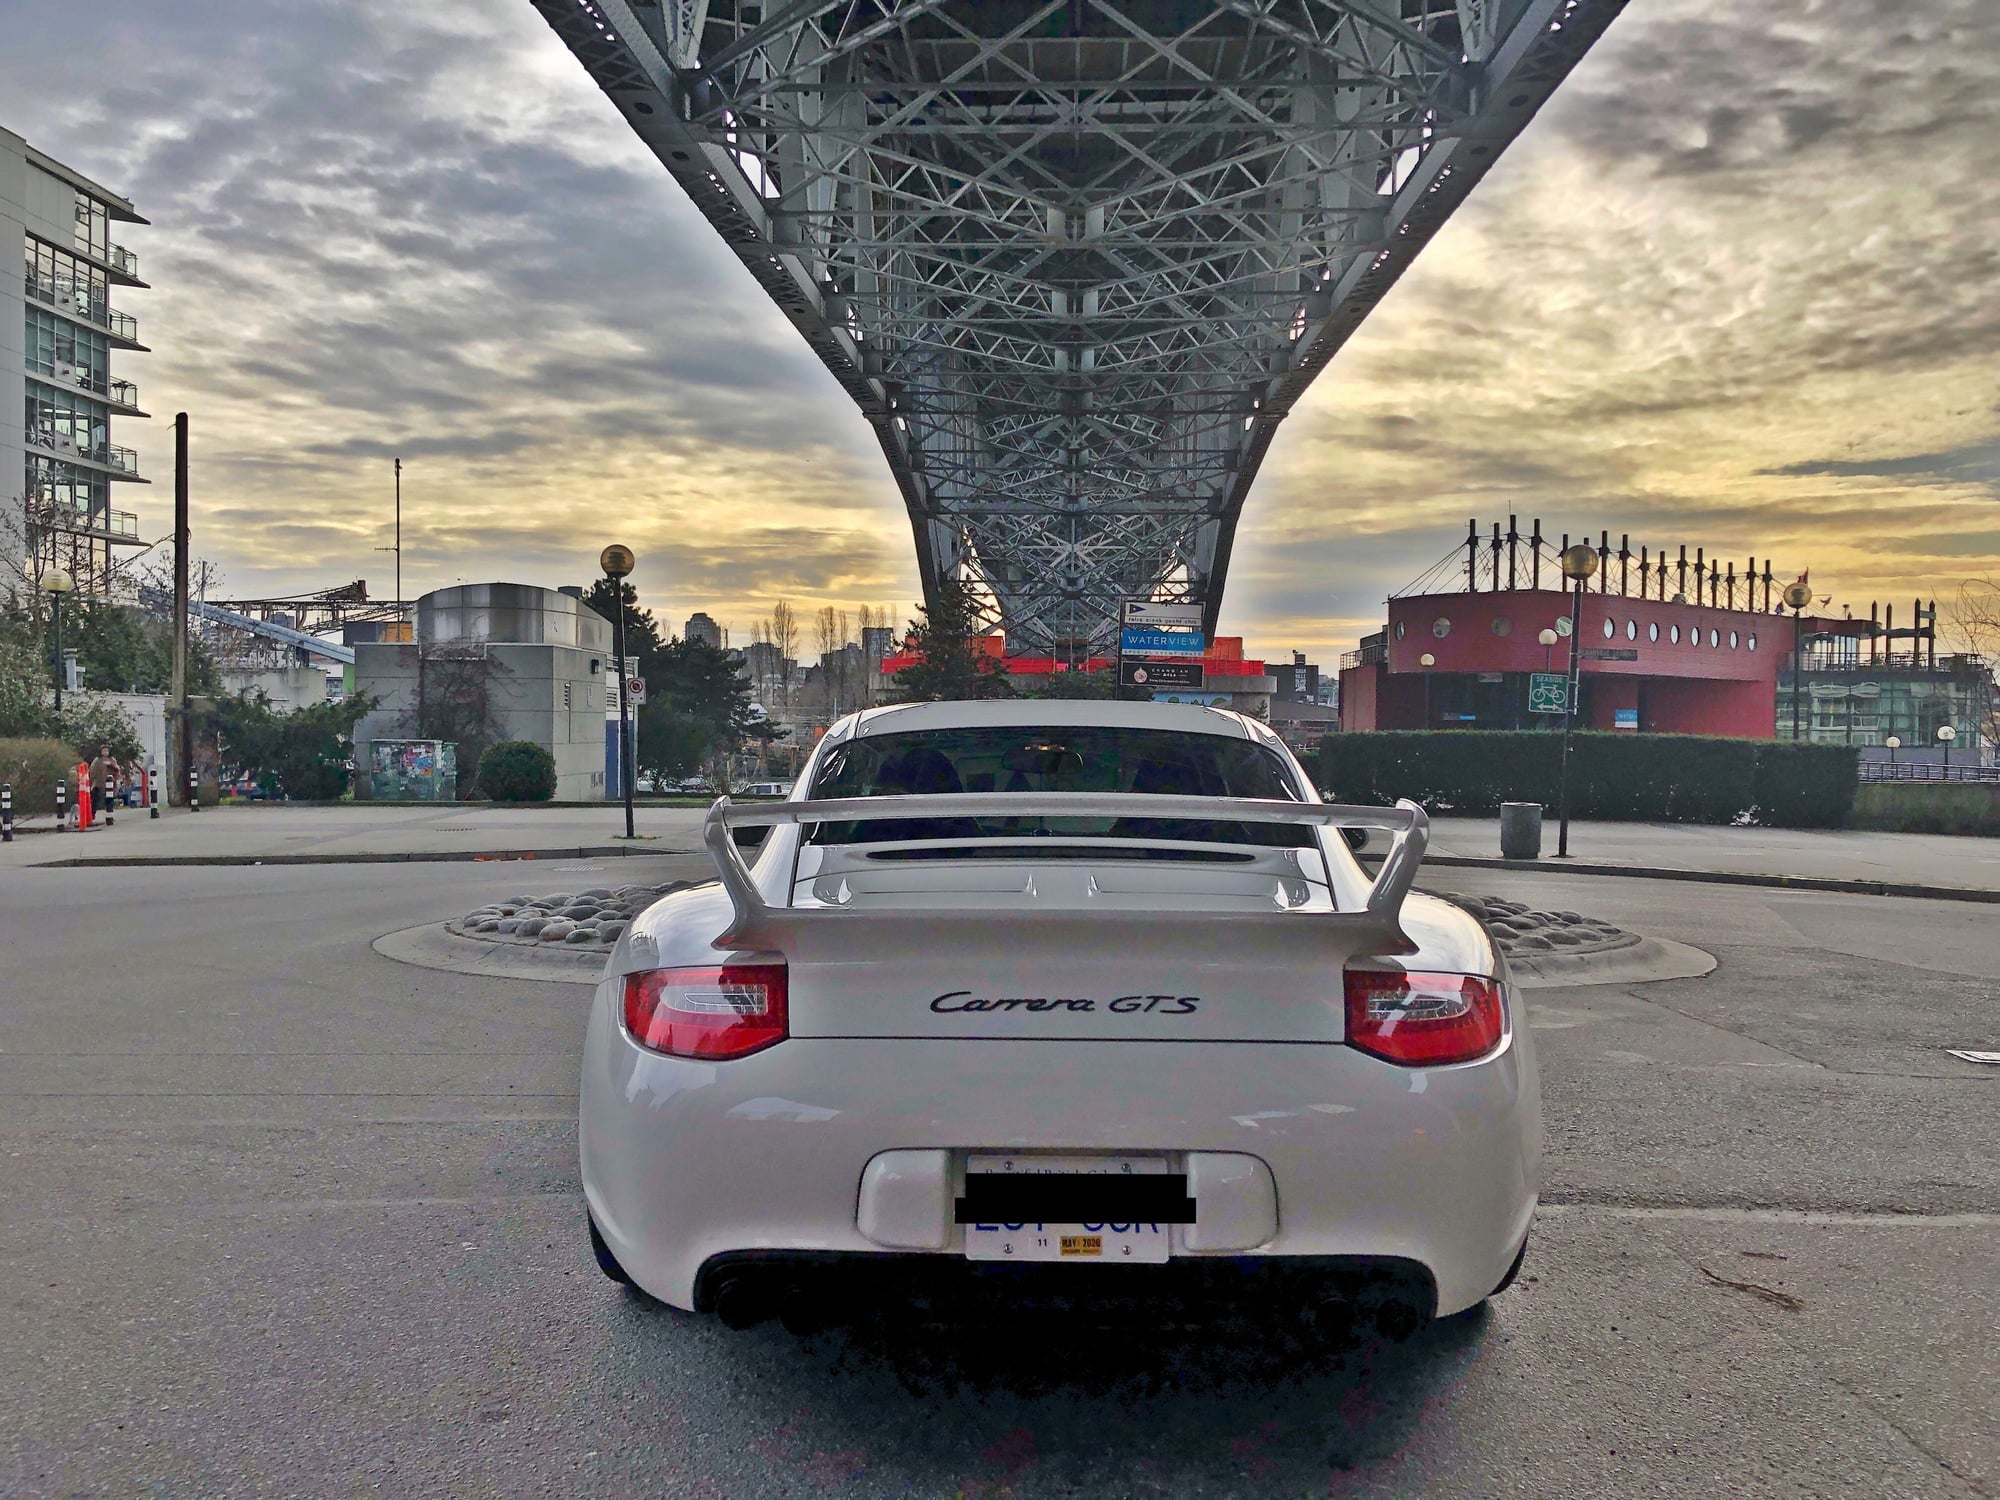 2011 Porsche 911 - 2011 Porsche 997.2 GTS (Ultra rare build. Full Aero, Carbon Buckets, Low Milage) - Used - VIN WP0AB2A99BS721044 - 6 cyl - 2WD - Automatic - Coupe - White - Vancouver Canada, BC V6Z3E7, Canada